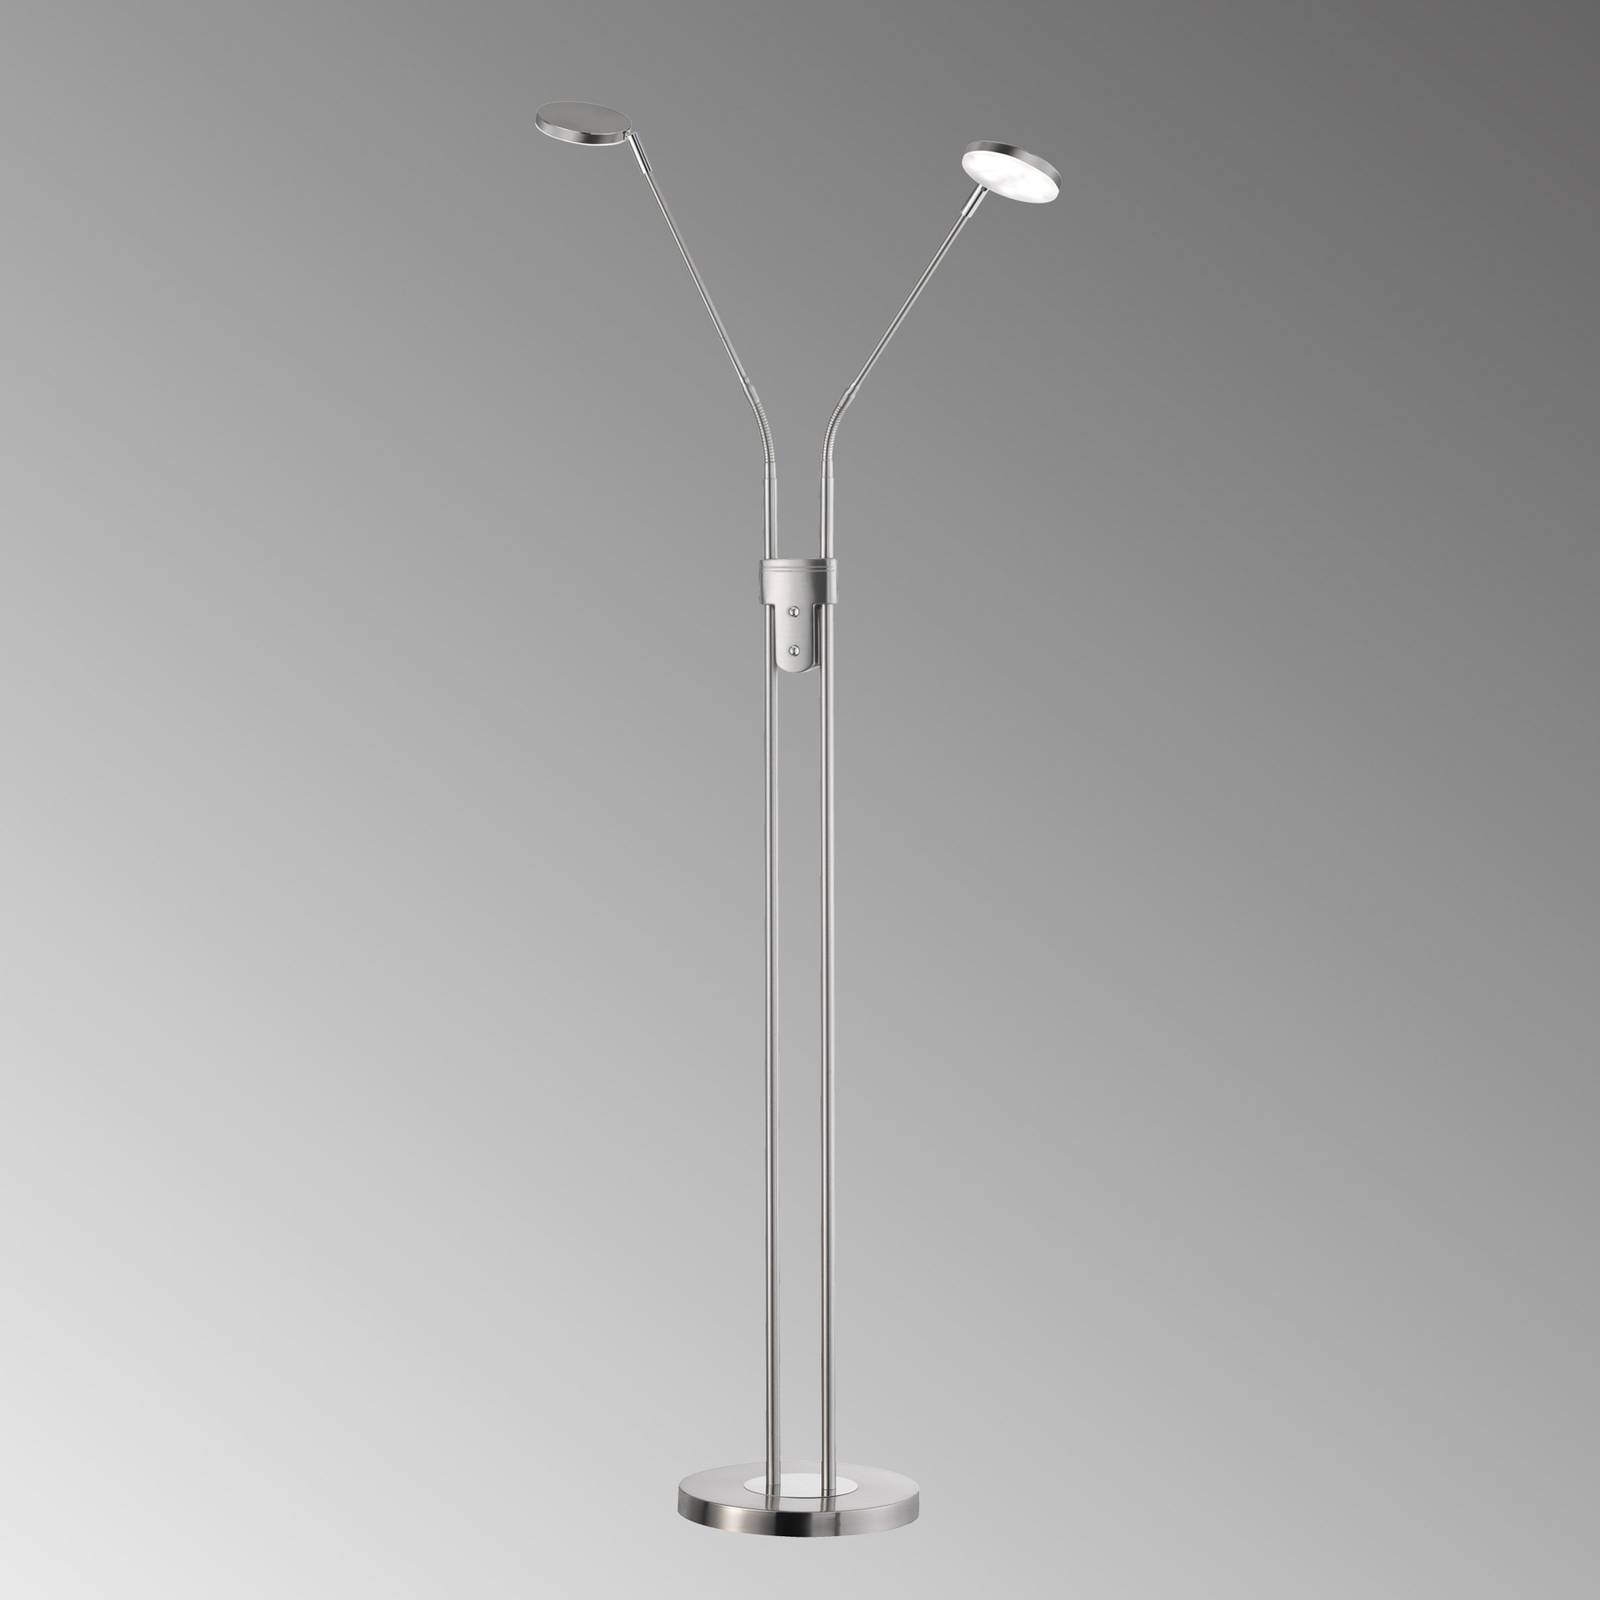 Image of FH Lighting Lampadaire LED Lunia à deux lampes, nickel mat 4052231400377